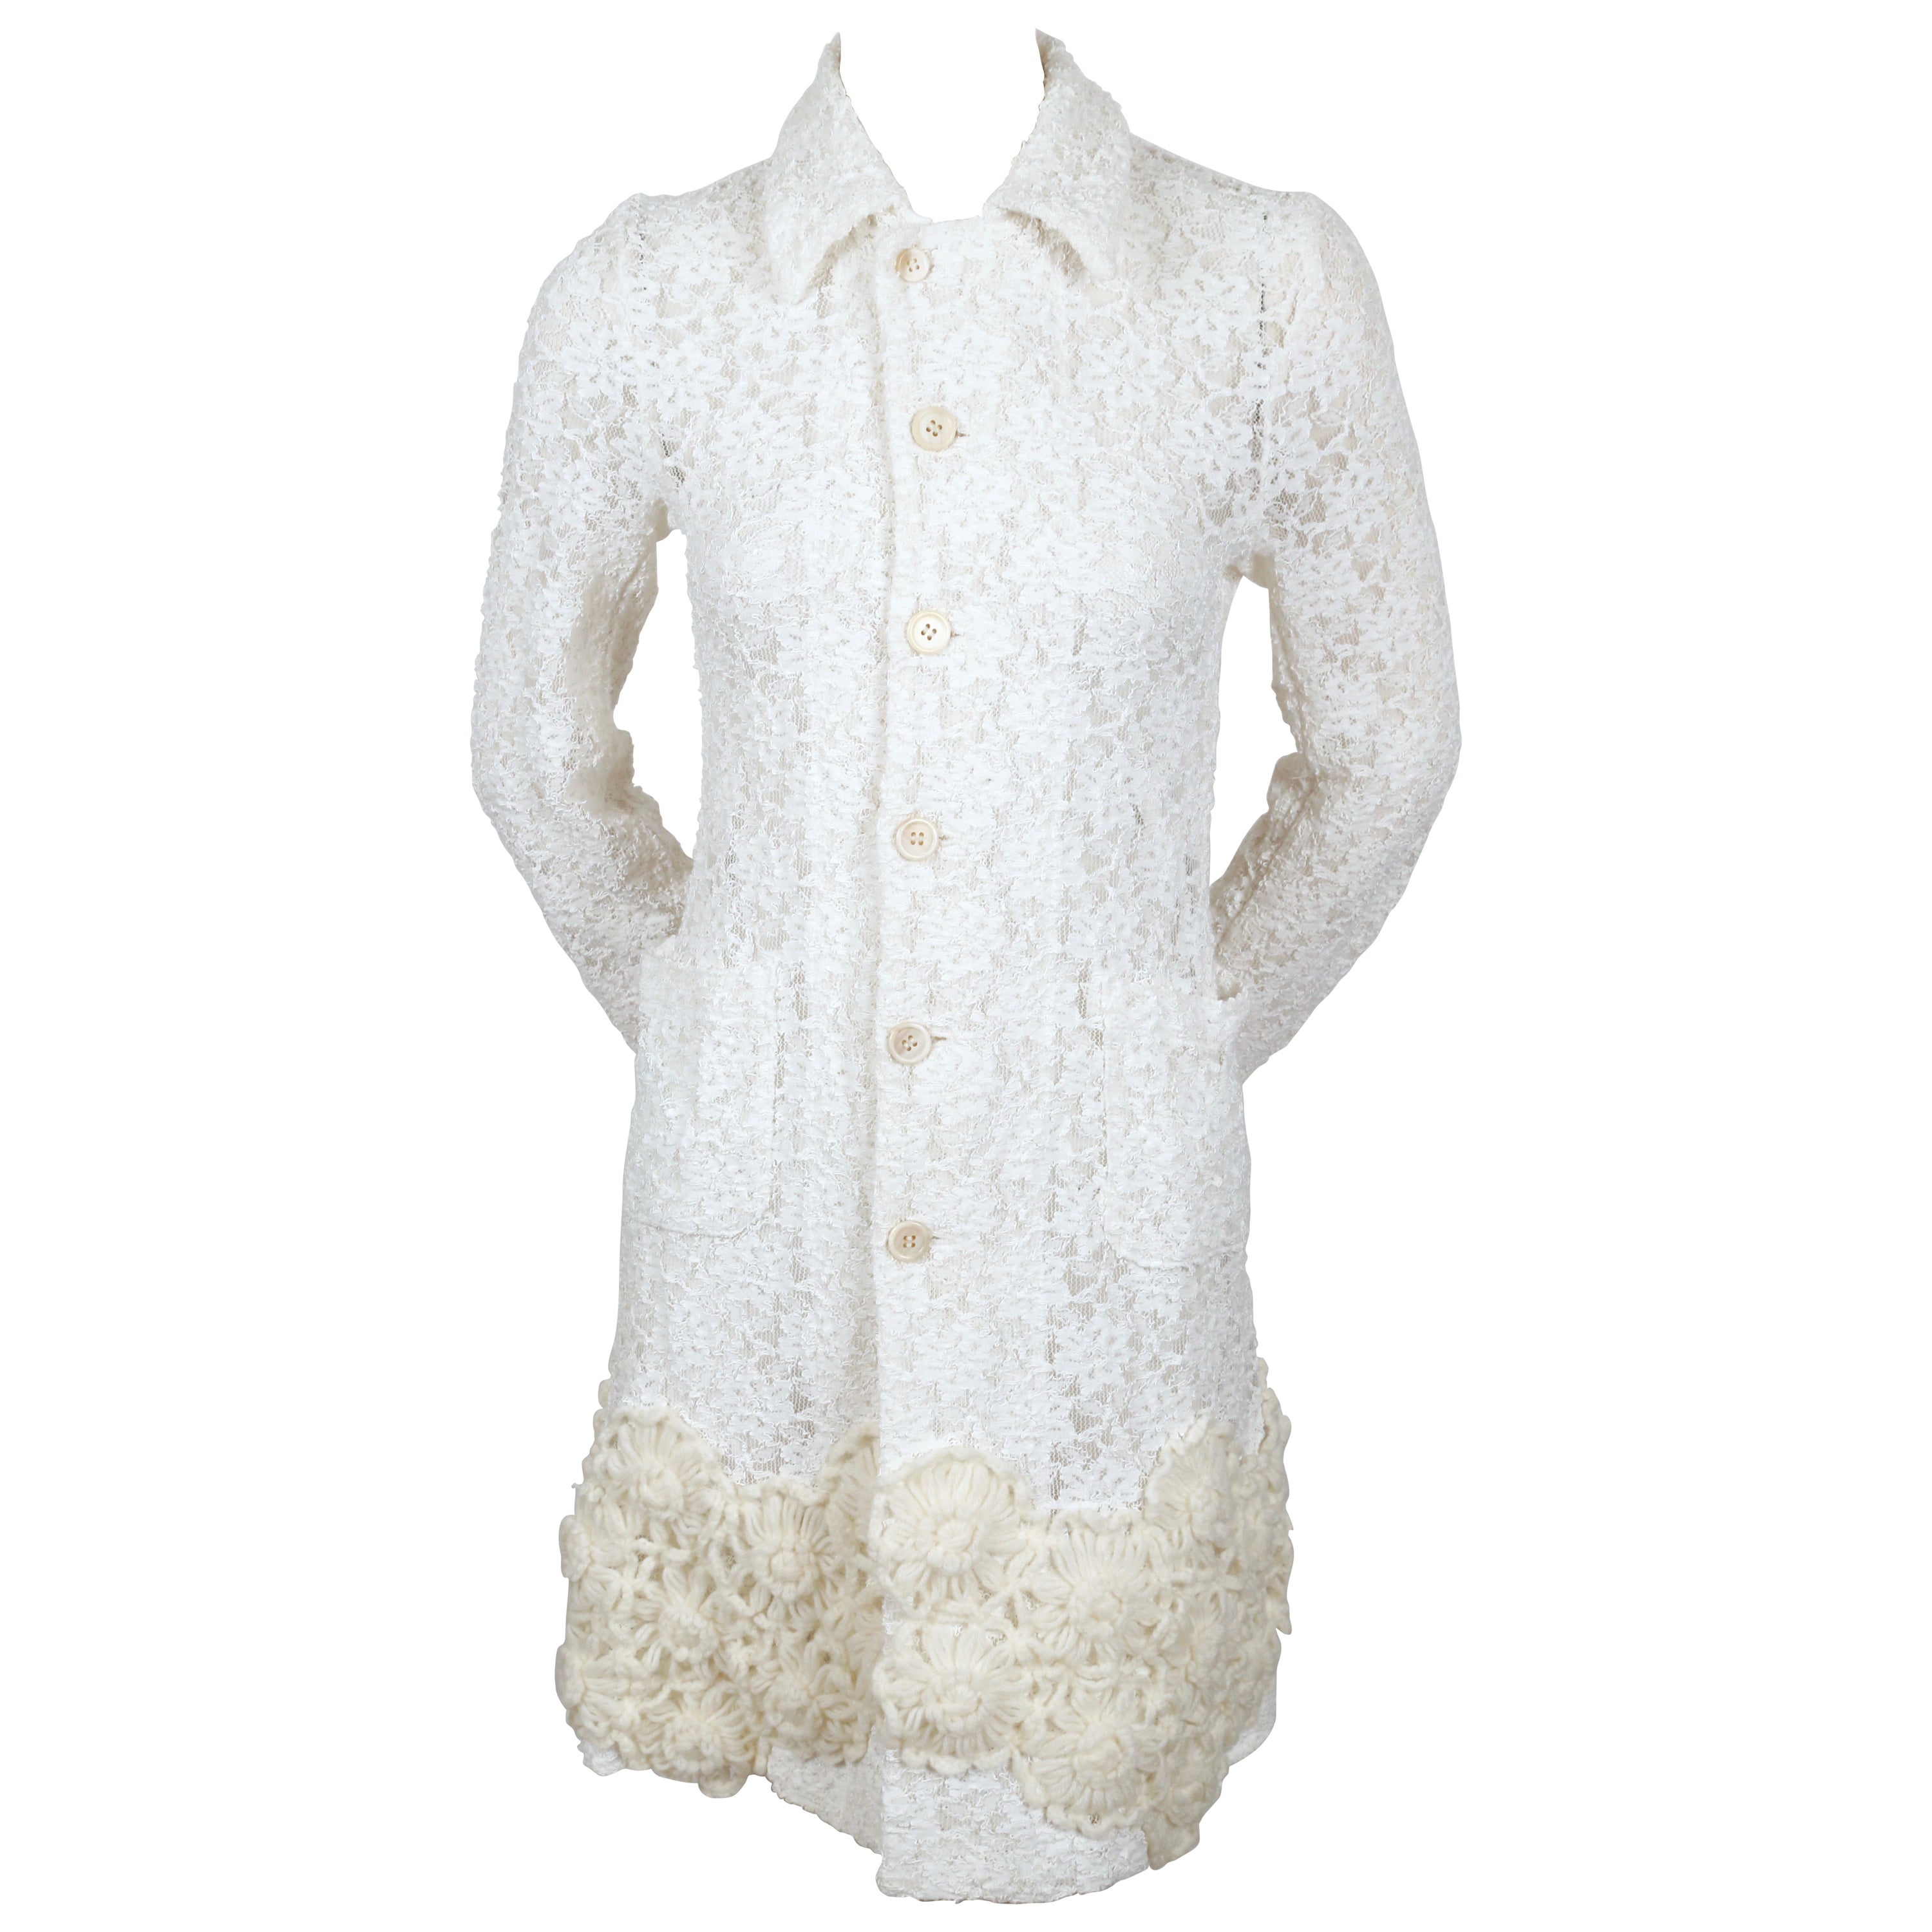 2012 COMME DES GARCONS off-white lace jacket with knit flower detail